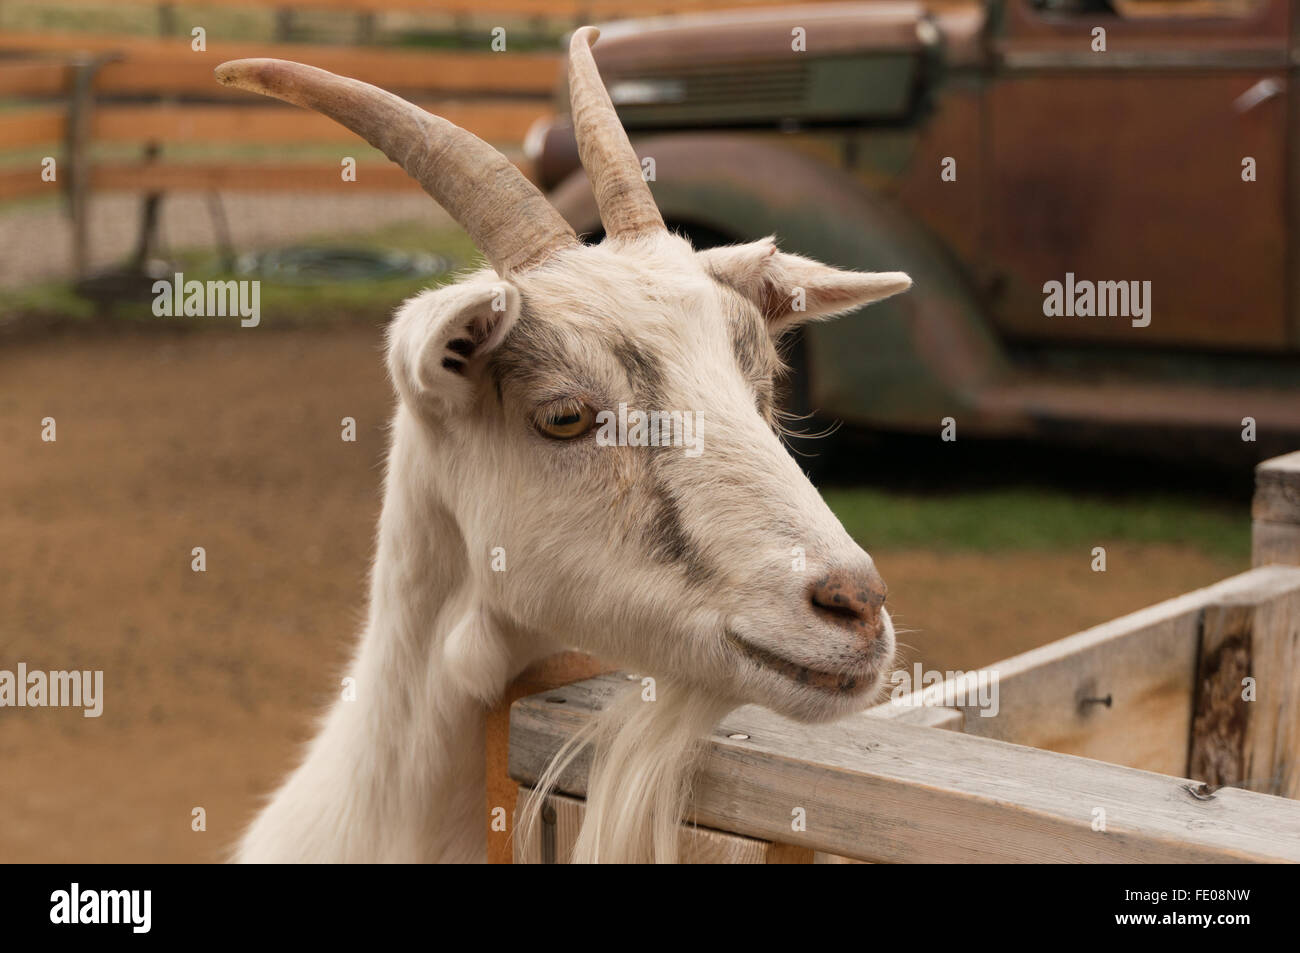 Closeup head shot of curious smiling horned white goat leaning over wood fence with old-style truck in background Stock Photo